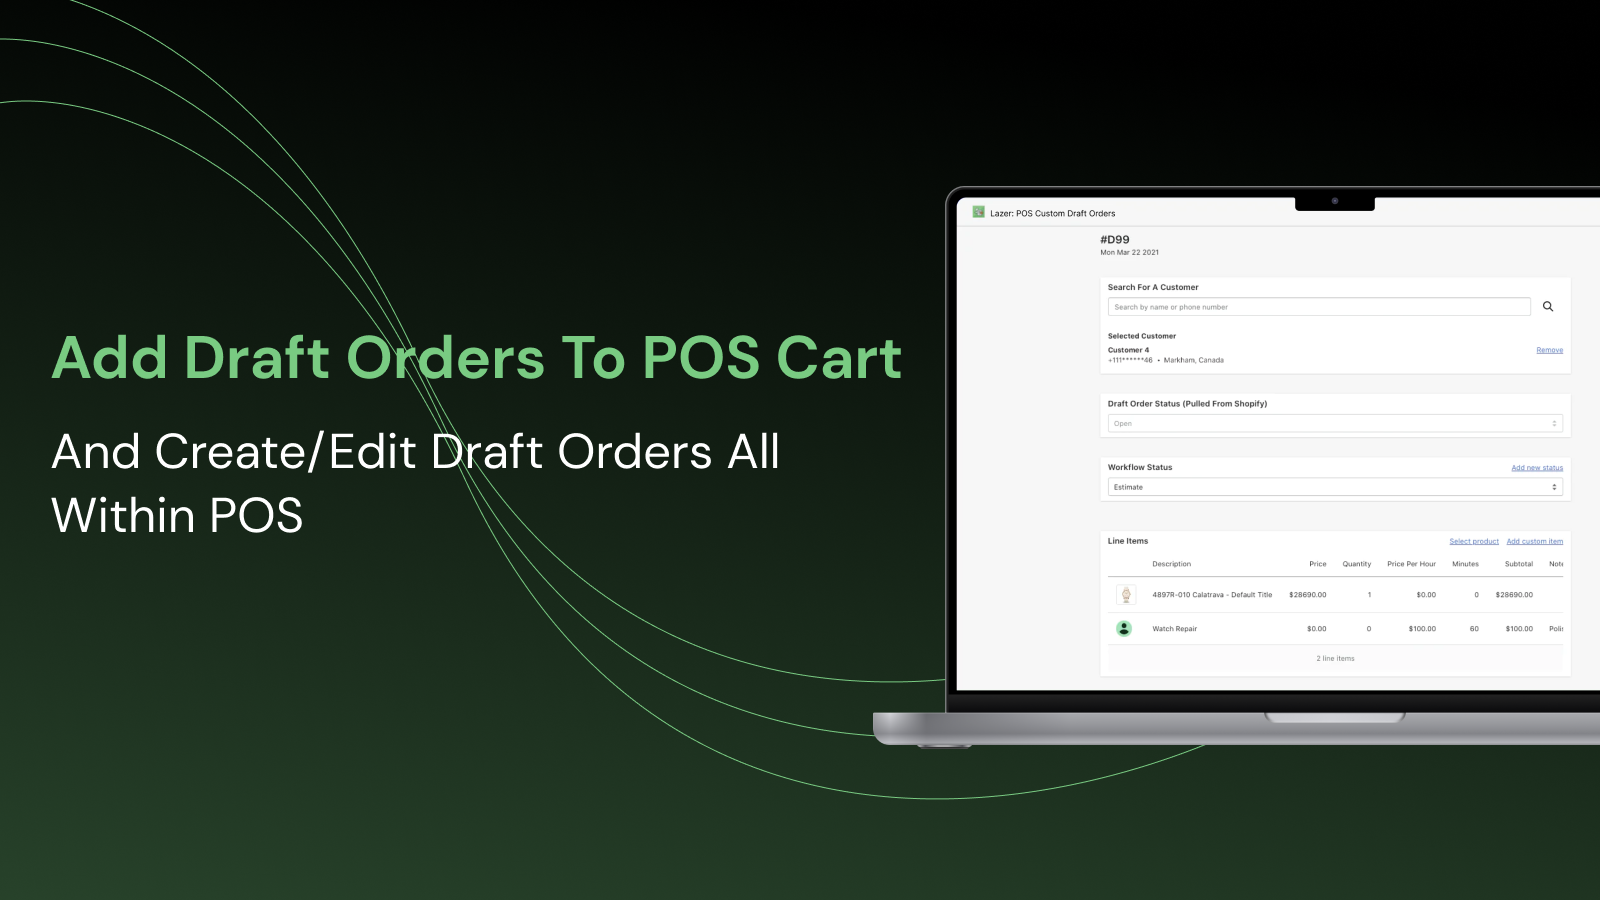 Create & Edit Draft Order For POS, & Add Draft Order To POS Cart